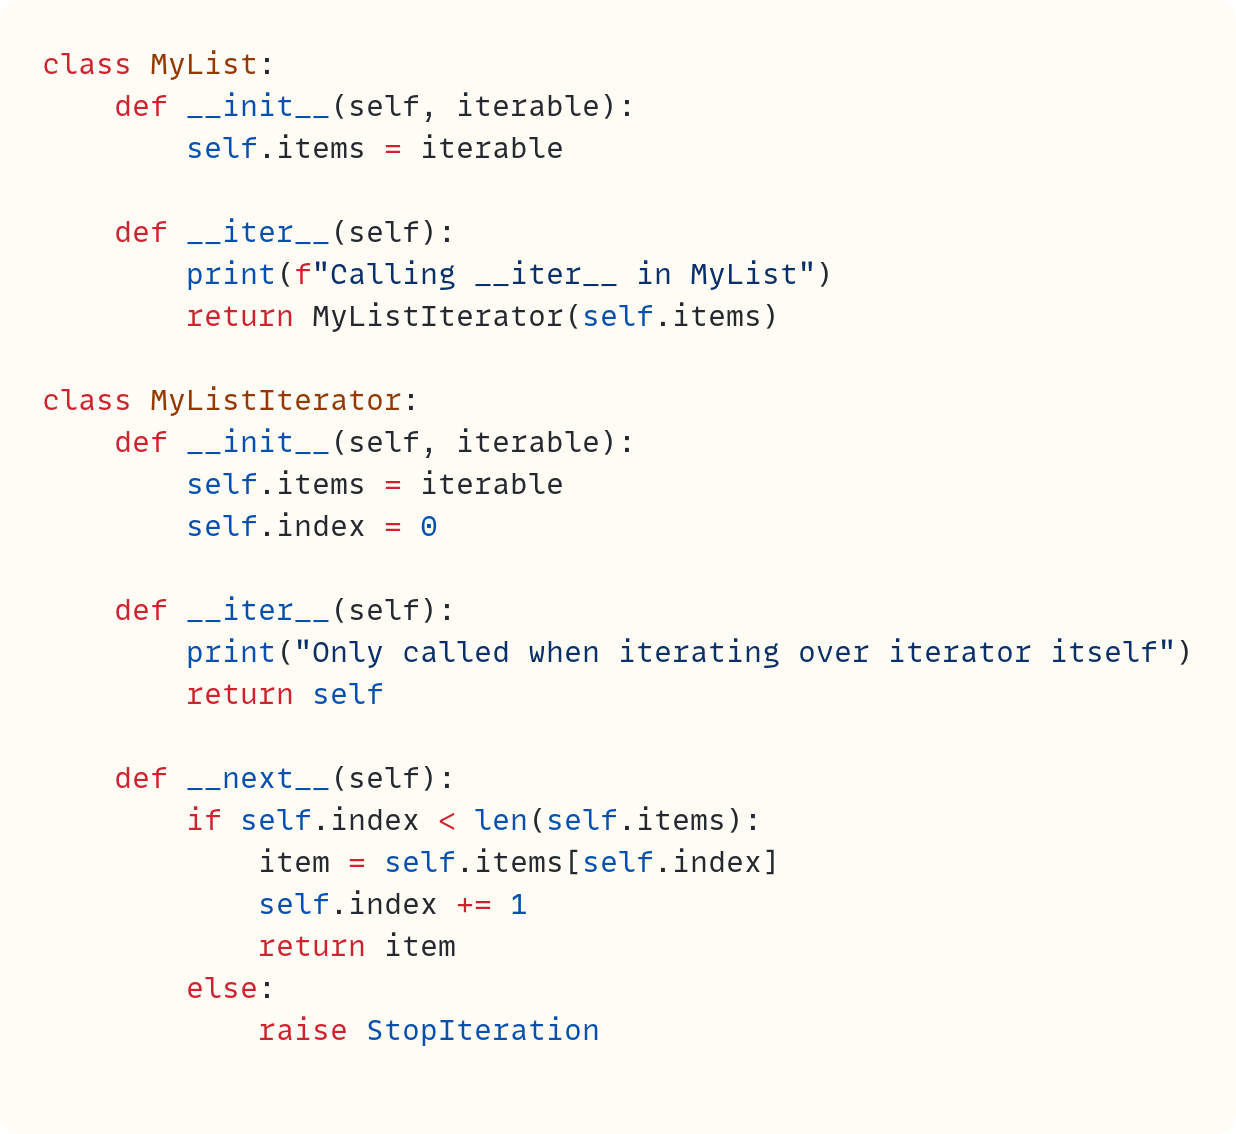 class MyList:     def __init__(self, iterable):         self.items = iterable      def __iter__(self):         print(f"Calling __iter__ in MyList")         return MyListIterator(self.items)  class MyListIterator:     def __init__(self, iterable):         self.items = iterable         self.index = 0      def __iter__(self):         print("Only called when iterating over iterator itself")         return self      def __next__(self):         if self.index < len(self.items):             item = self.items[self.index]             self.index += 1             return item         else:             raise StopIteration